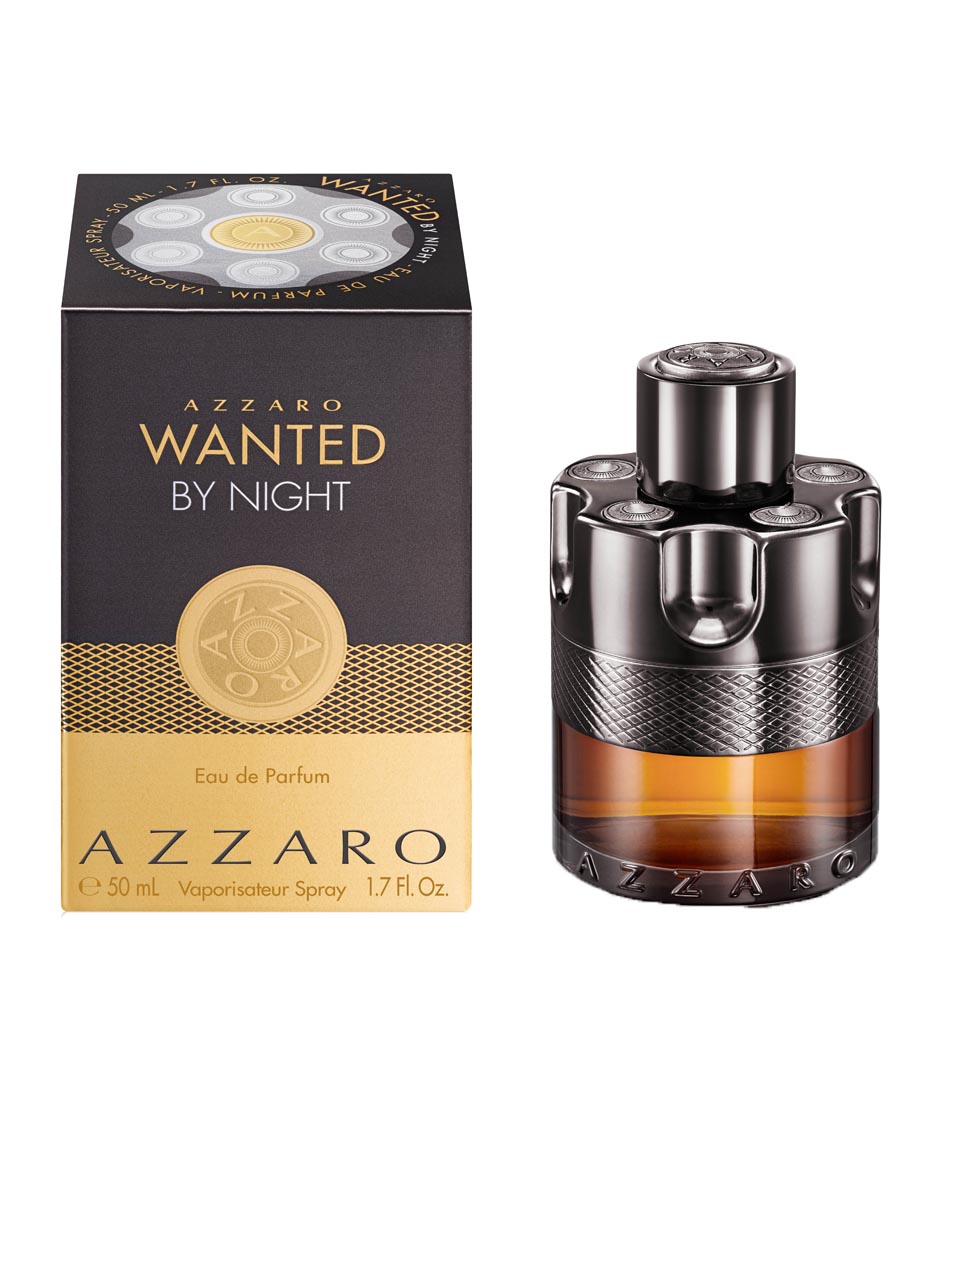 Azzaro Wanted Wanted By Night Eau de Parfum 50 ml null - onesize - 1